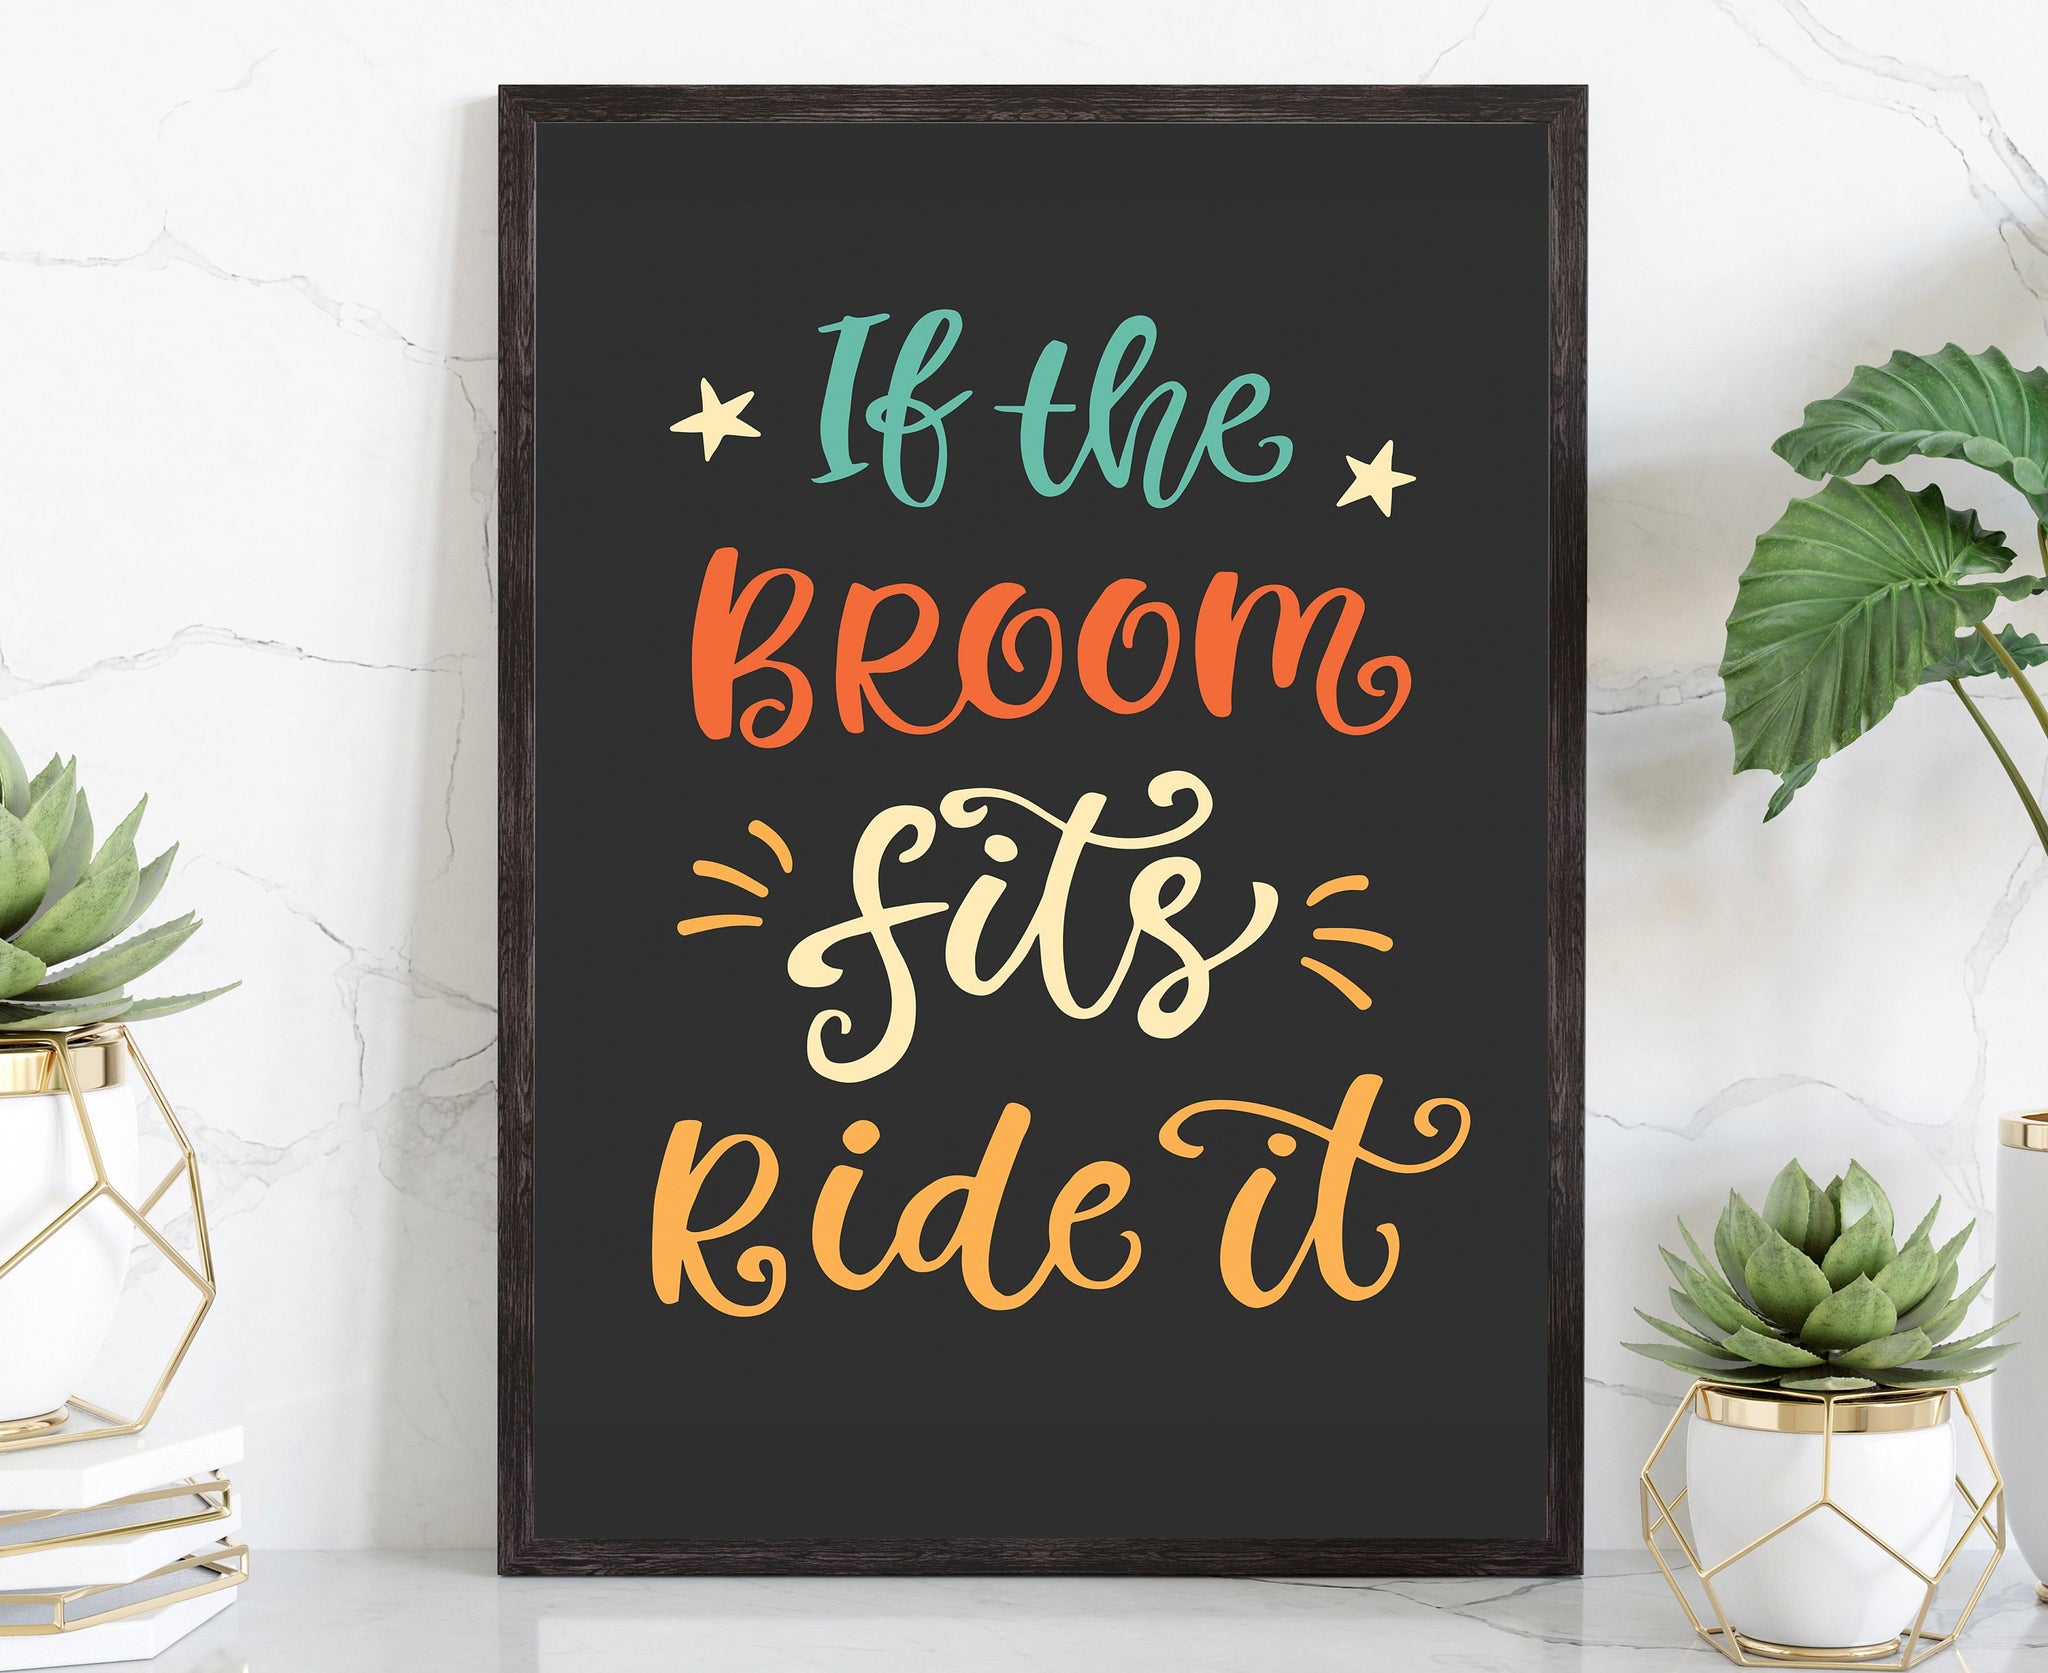 If The Broom Fits Ride It, Gym Poster, Gym wall art, Gym Prints, Gym Decor, Home Gym,  Home Gym Decor, Fitness Decor, Motivation Art, Poster